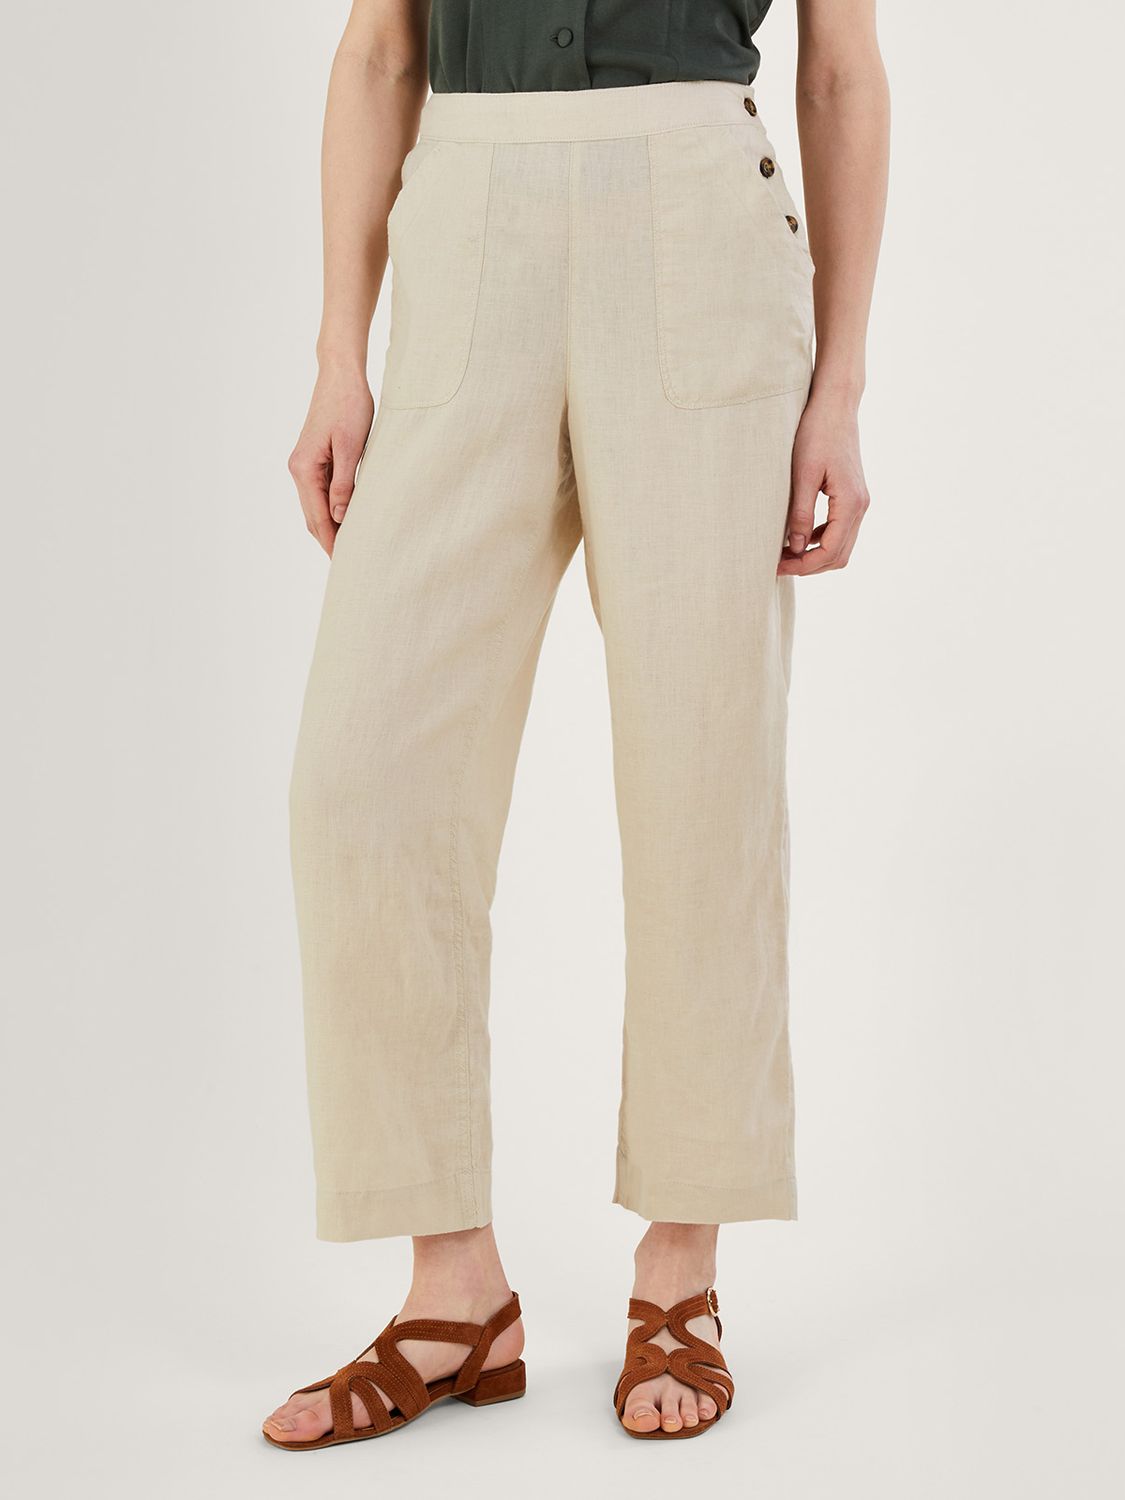 LINEN PULL-ON PANTS, NATURAL